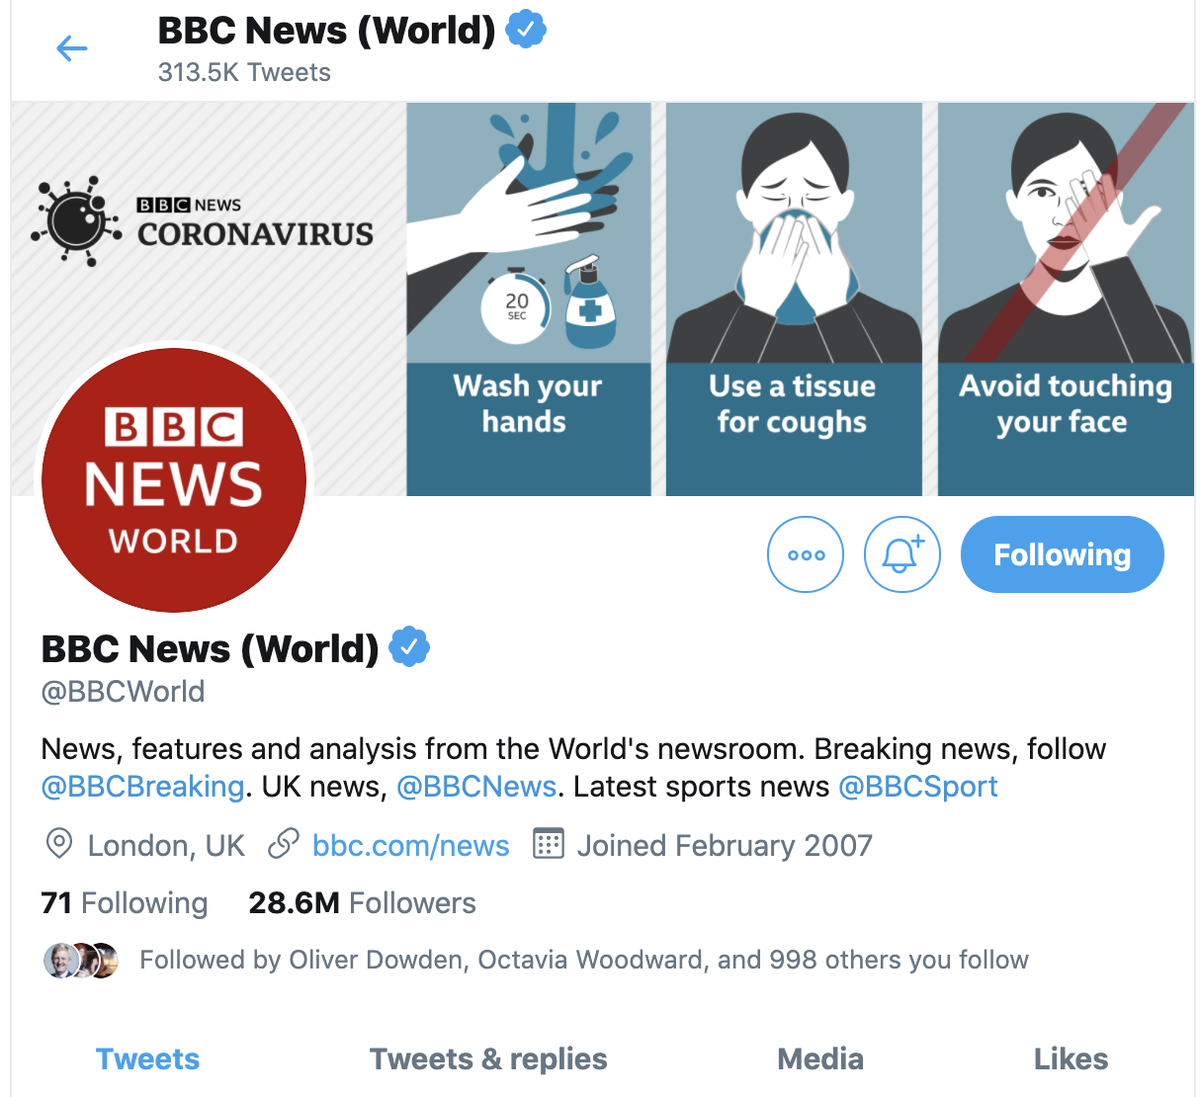 Twitter says media outlets that are partly or wholly funded by a state but are allowed to maintain editorial independence, "like the BBC in the UK or NPR in the US for example", will not be labelled. Voice of America and Radio Free Europe/Radio Liberty have also not been labelled